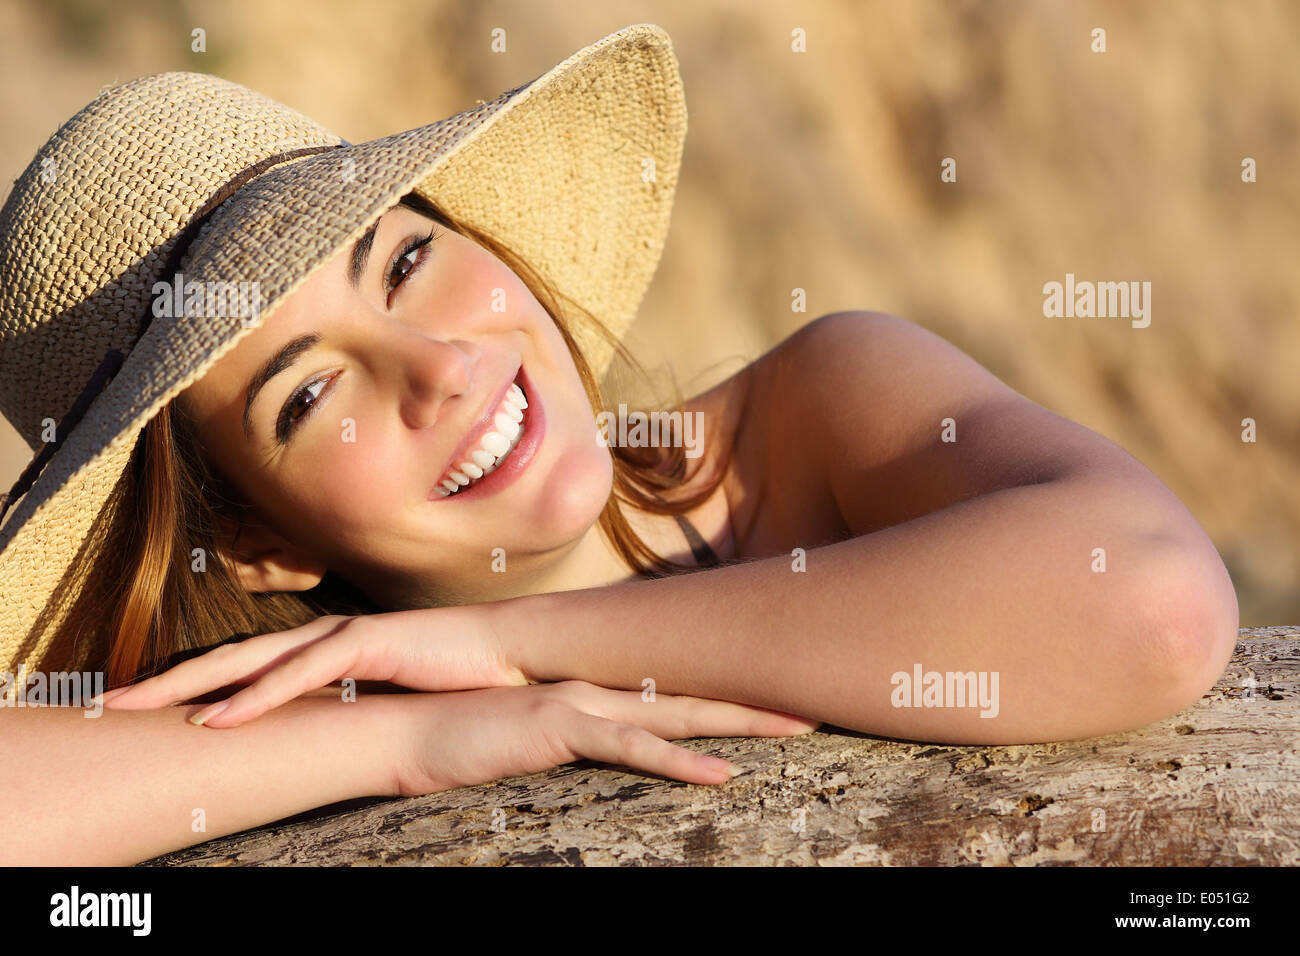 Portrait of a happy woman smiling with perfect white smile with a warm light and background Stock Photo